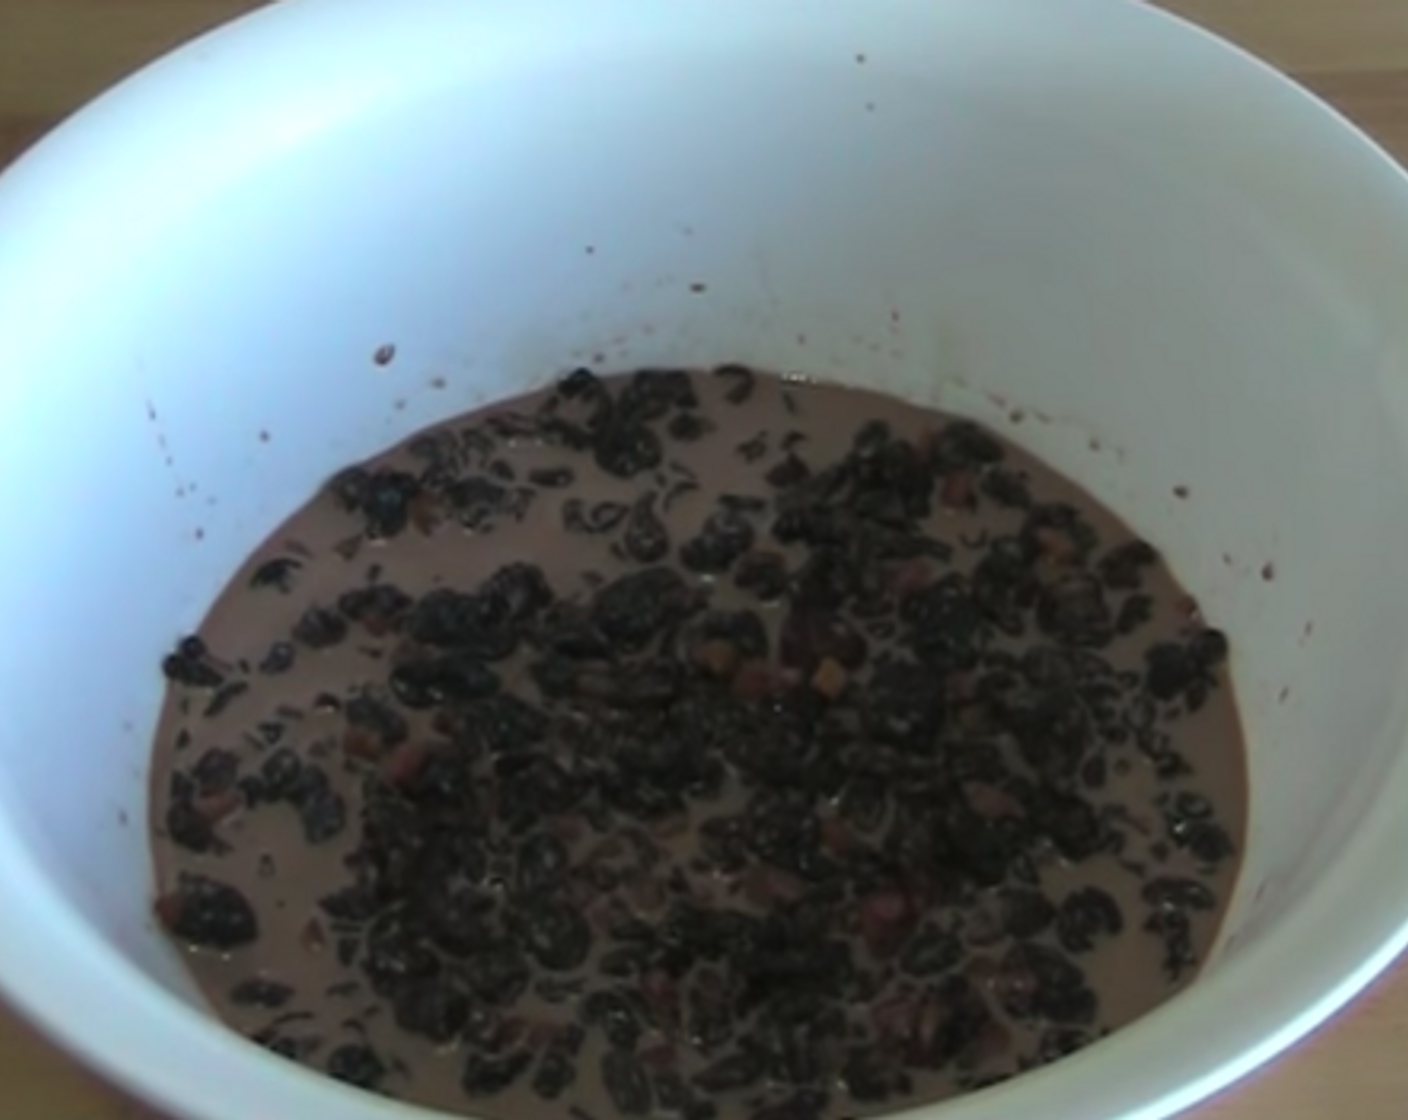 step 1 In a large bowl, add Dried Fruit Mix (6 1/4 cups) and Chocolate Milk (2 1/2 cups) and stir together to separate the fruit. Then, cover the bowl with plastic wrap and let it soak in the fridge for 8 hours.